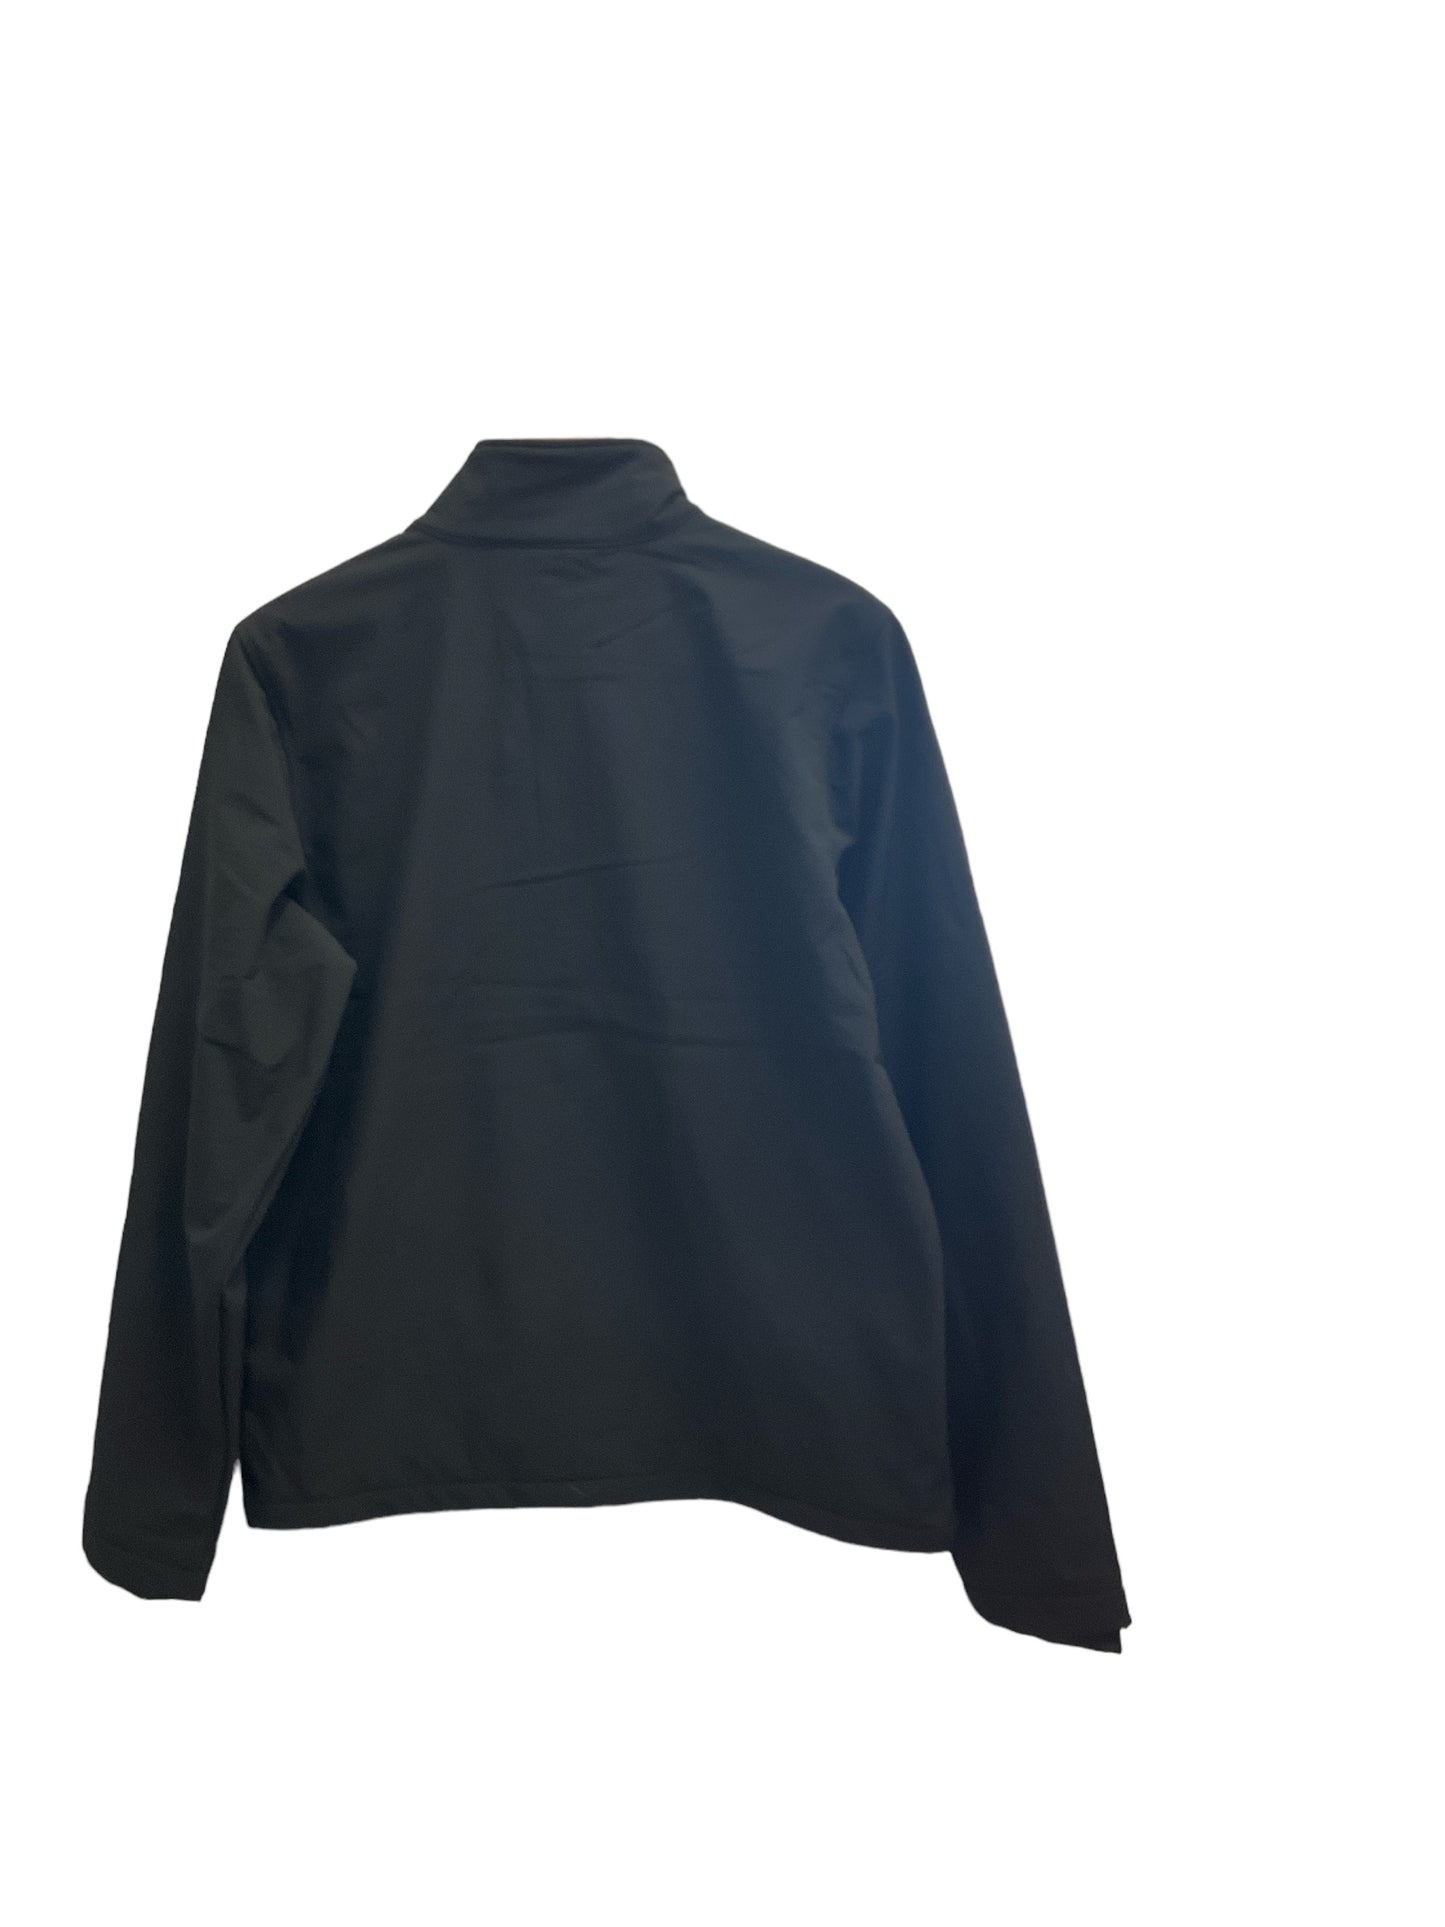 Athletic Jacket By Free Country  Size: S